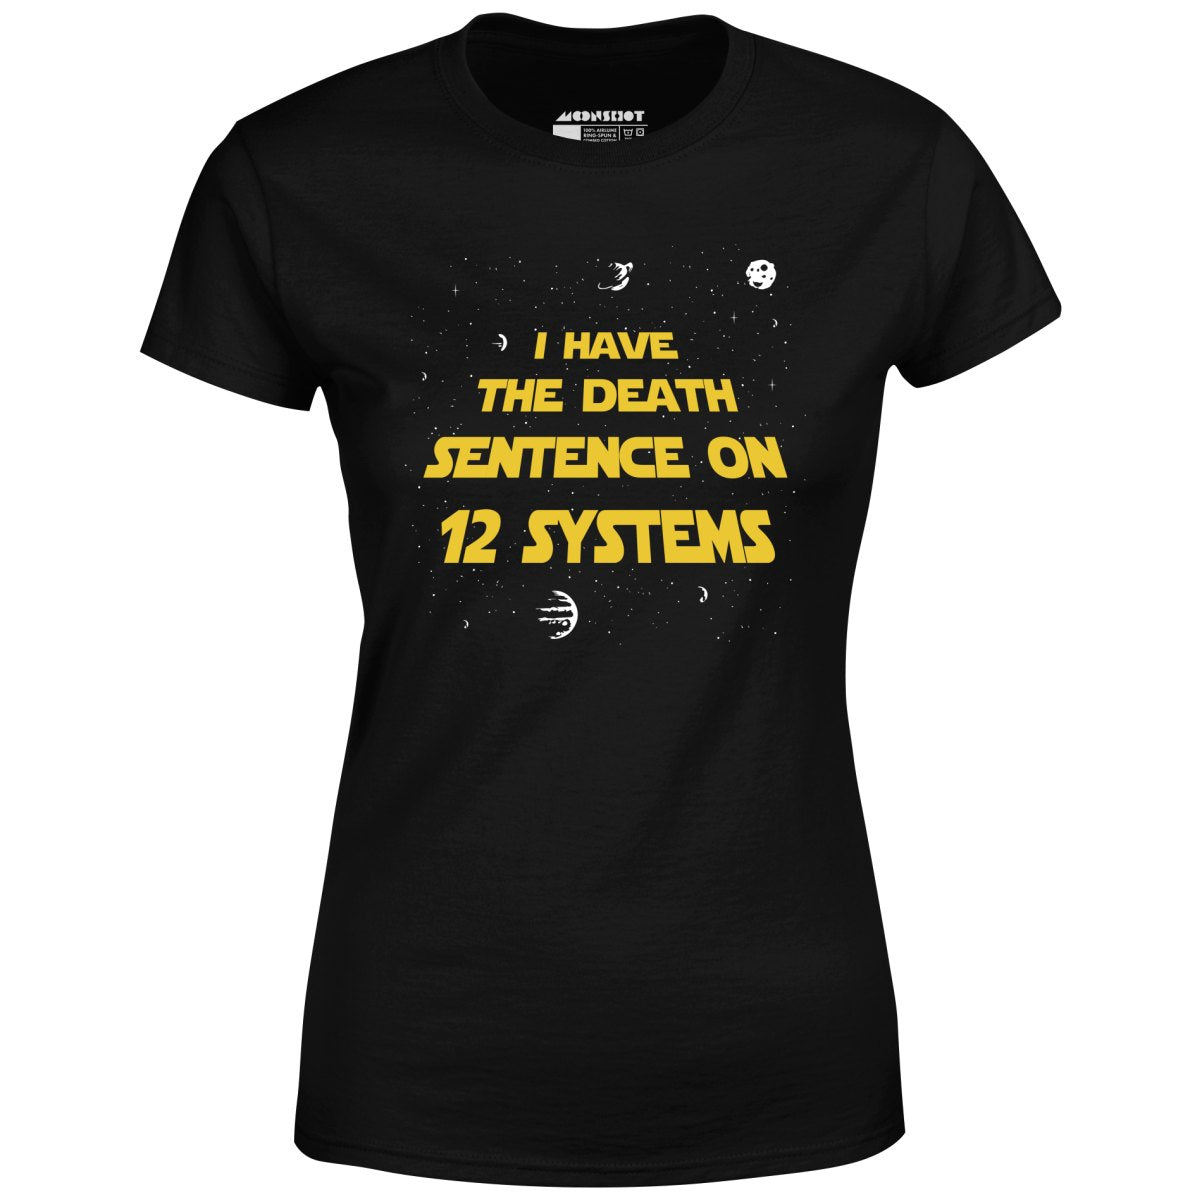 I Have the Death Sentence on 12 Systems v2 - Women's T-Shirt